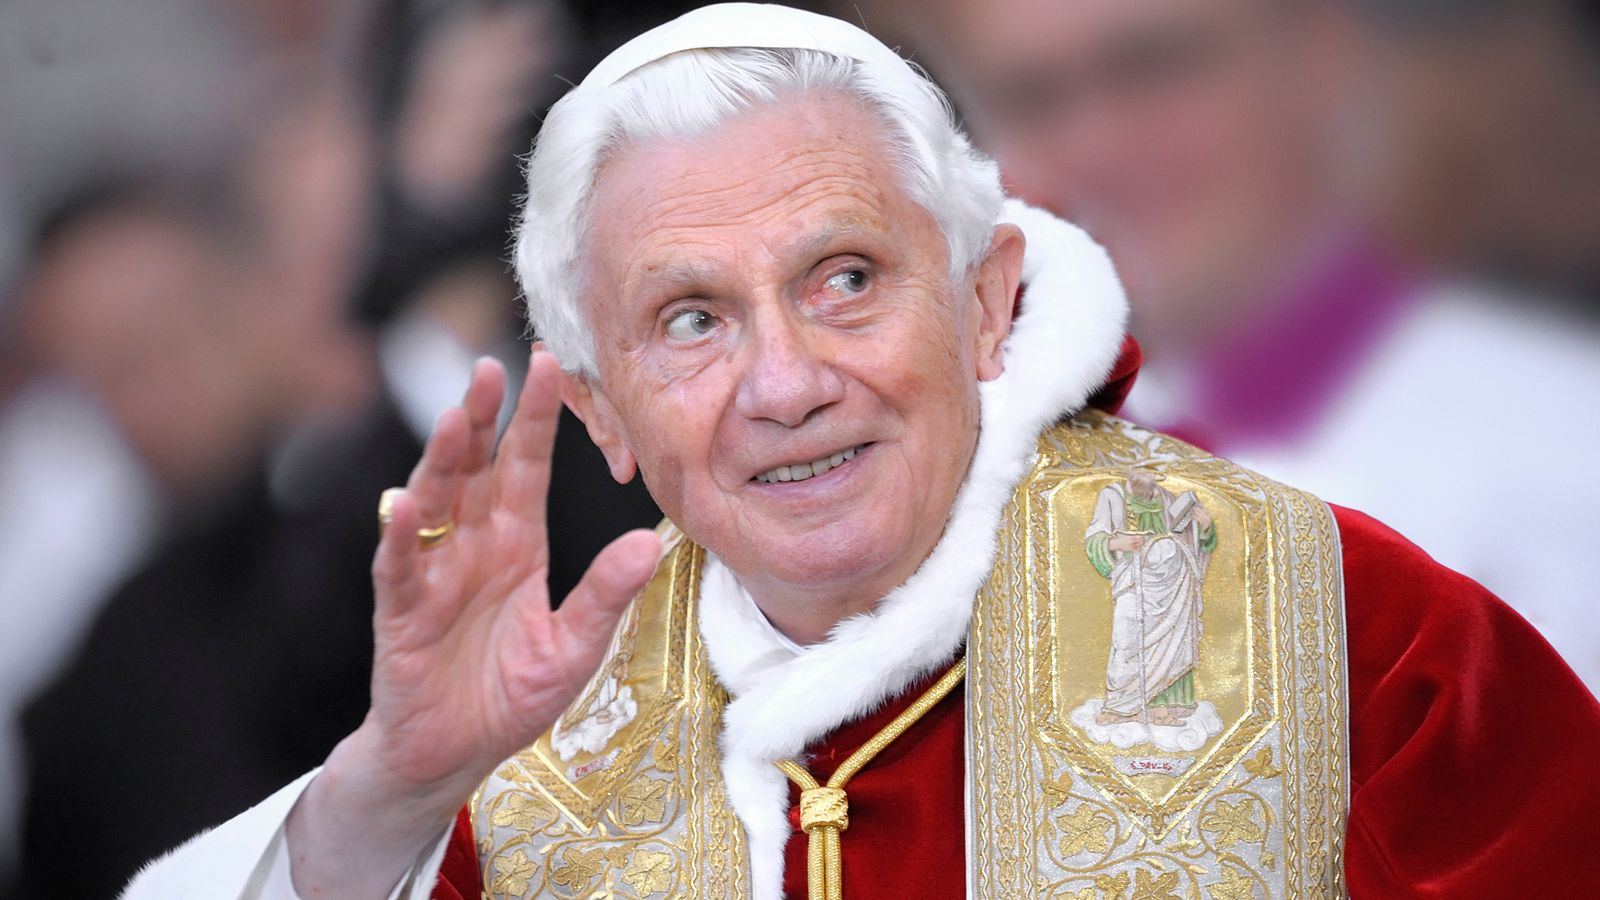 Former Pope Benedict XVI, the first to resign in centuries, dies aged 95